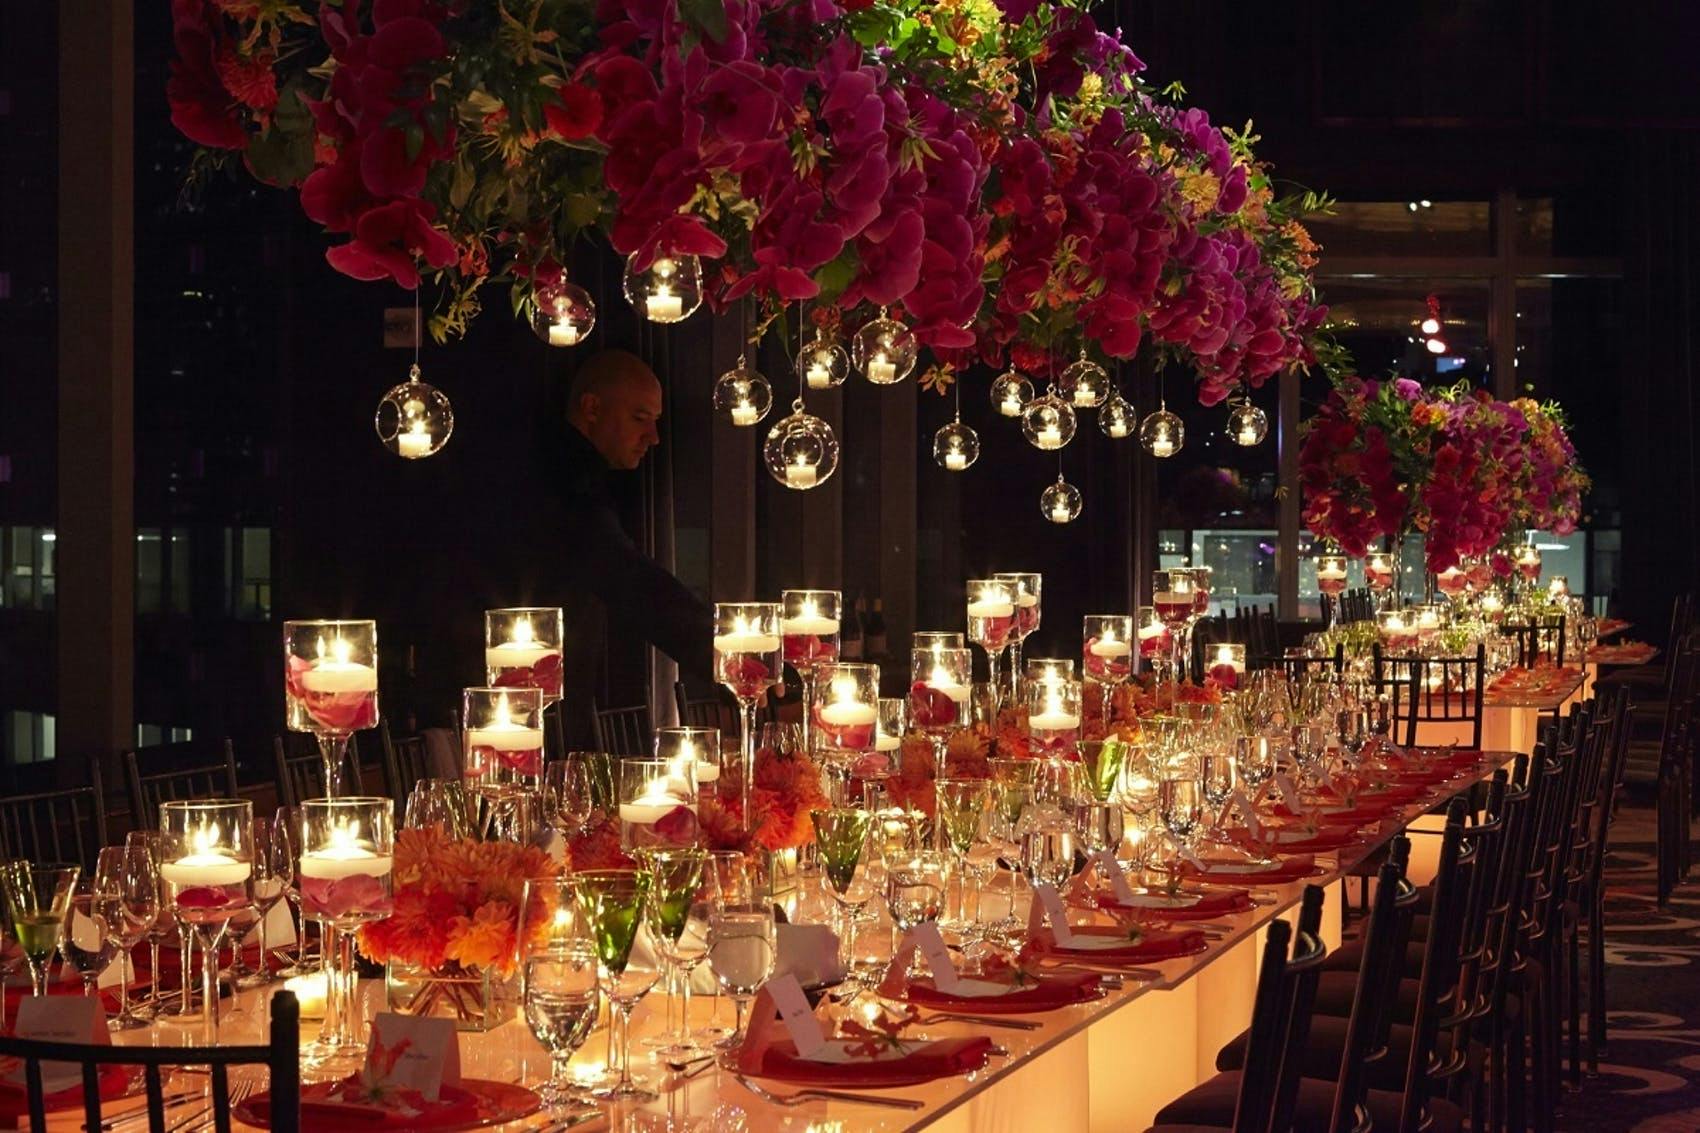 Table with candles in red wax throughout and rad roses hanging above